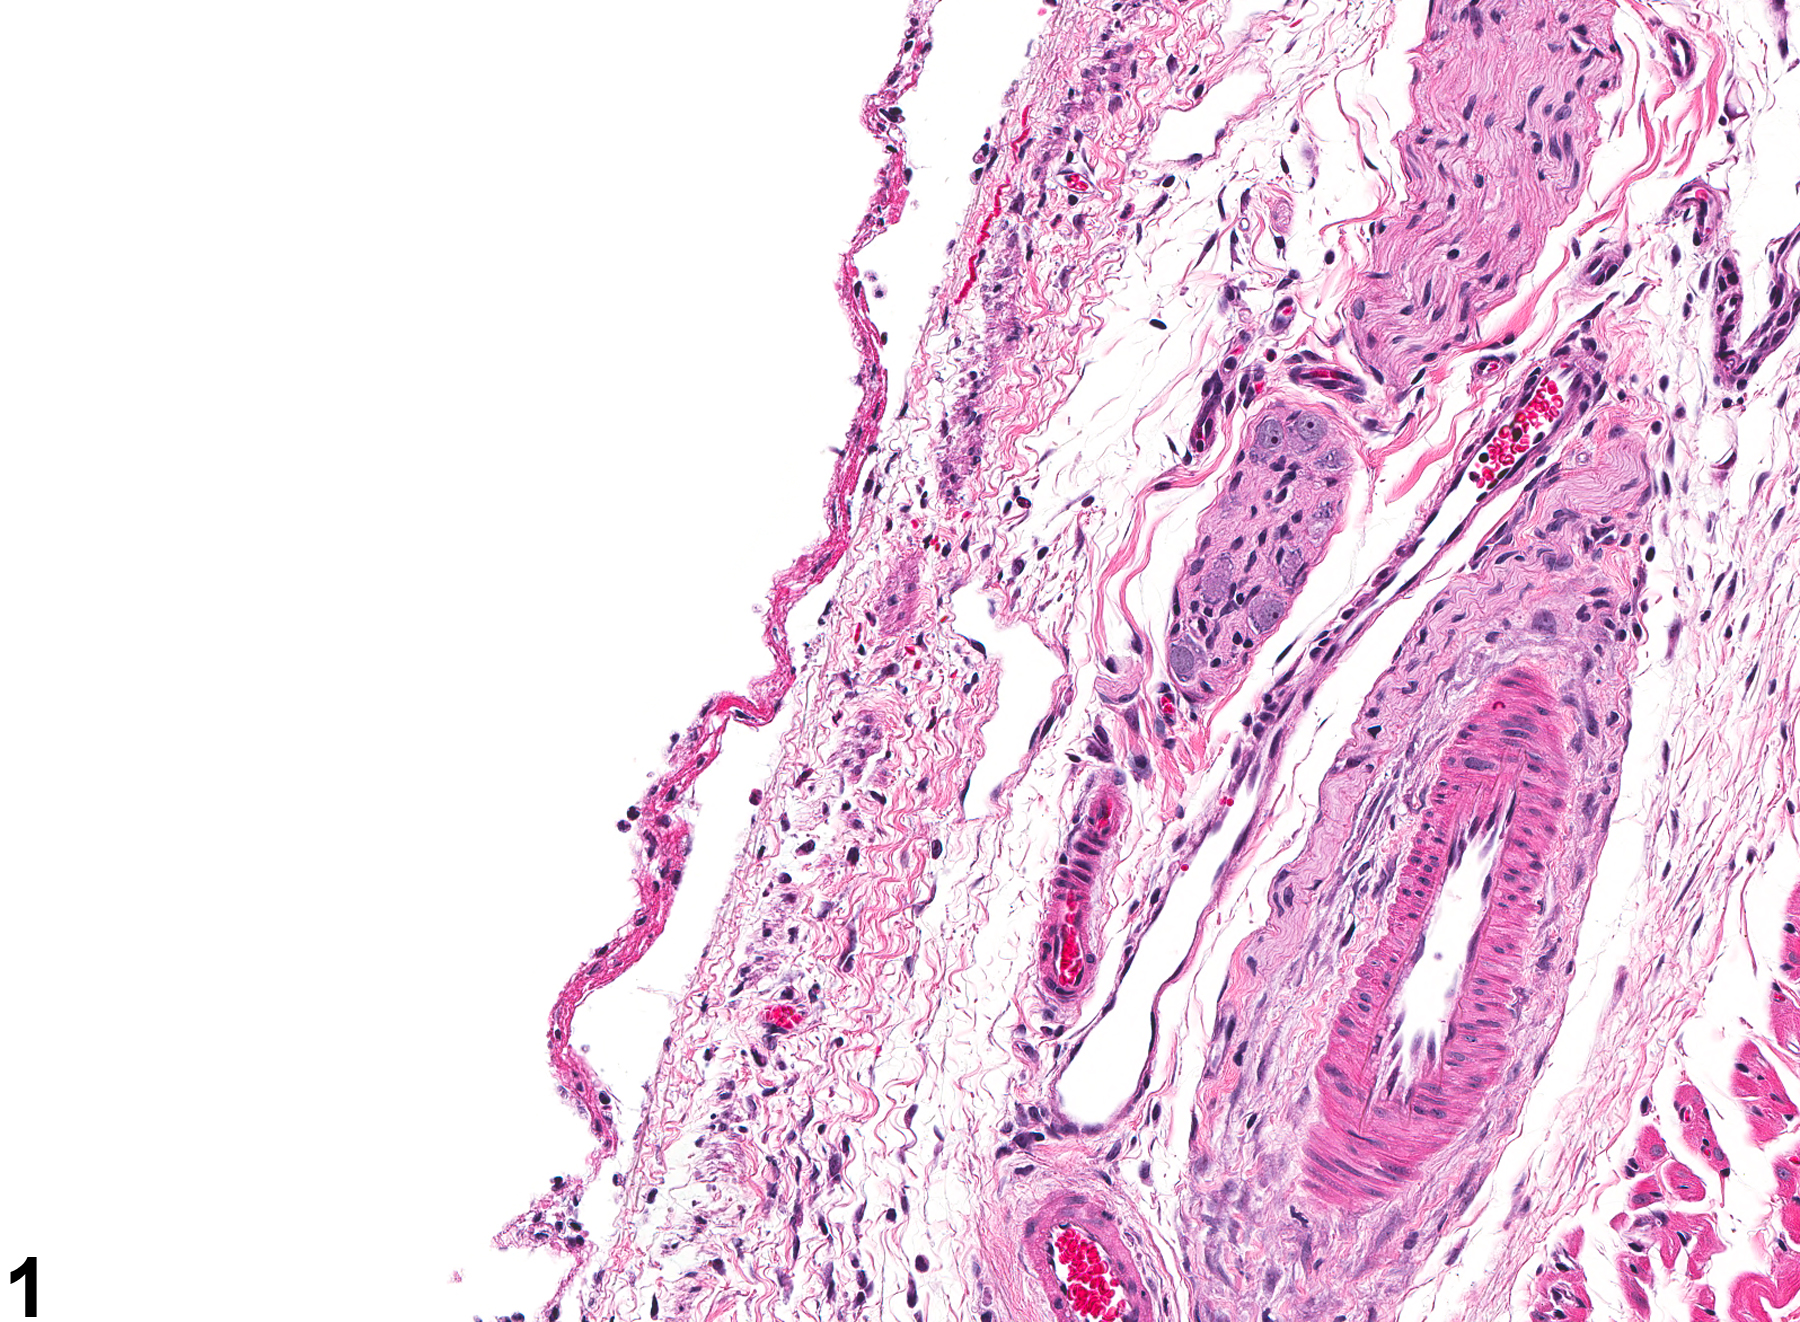 Image of bronchial ulceration in the lung from a male Wistar Han rat in a acute study